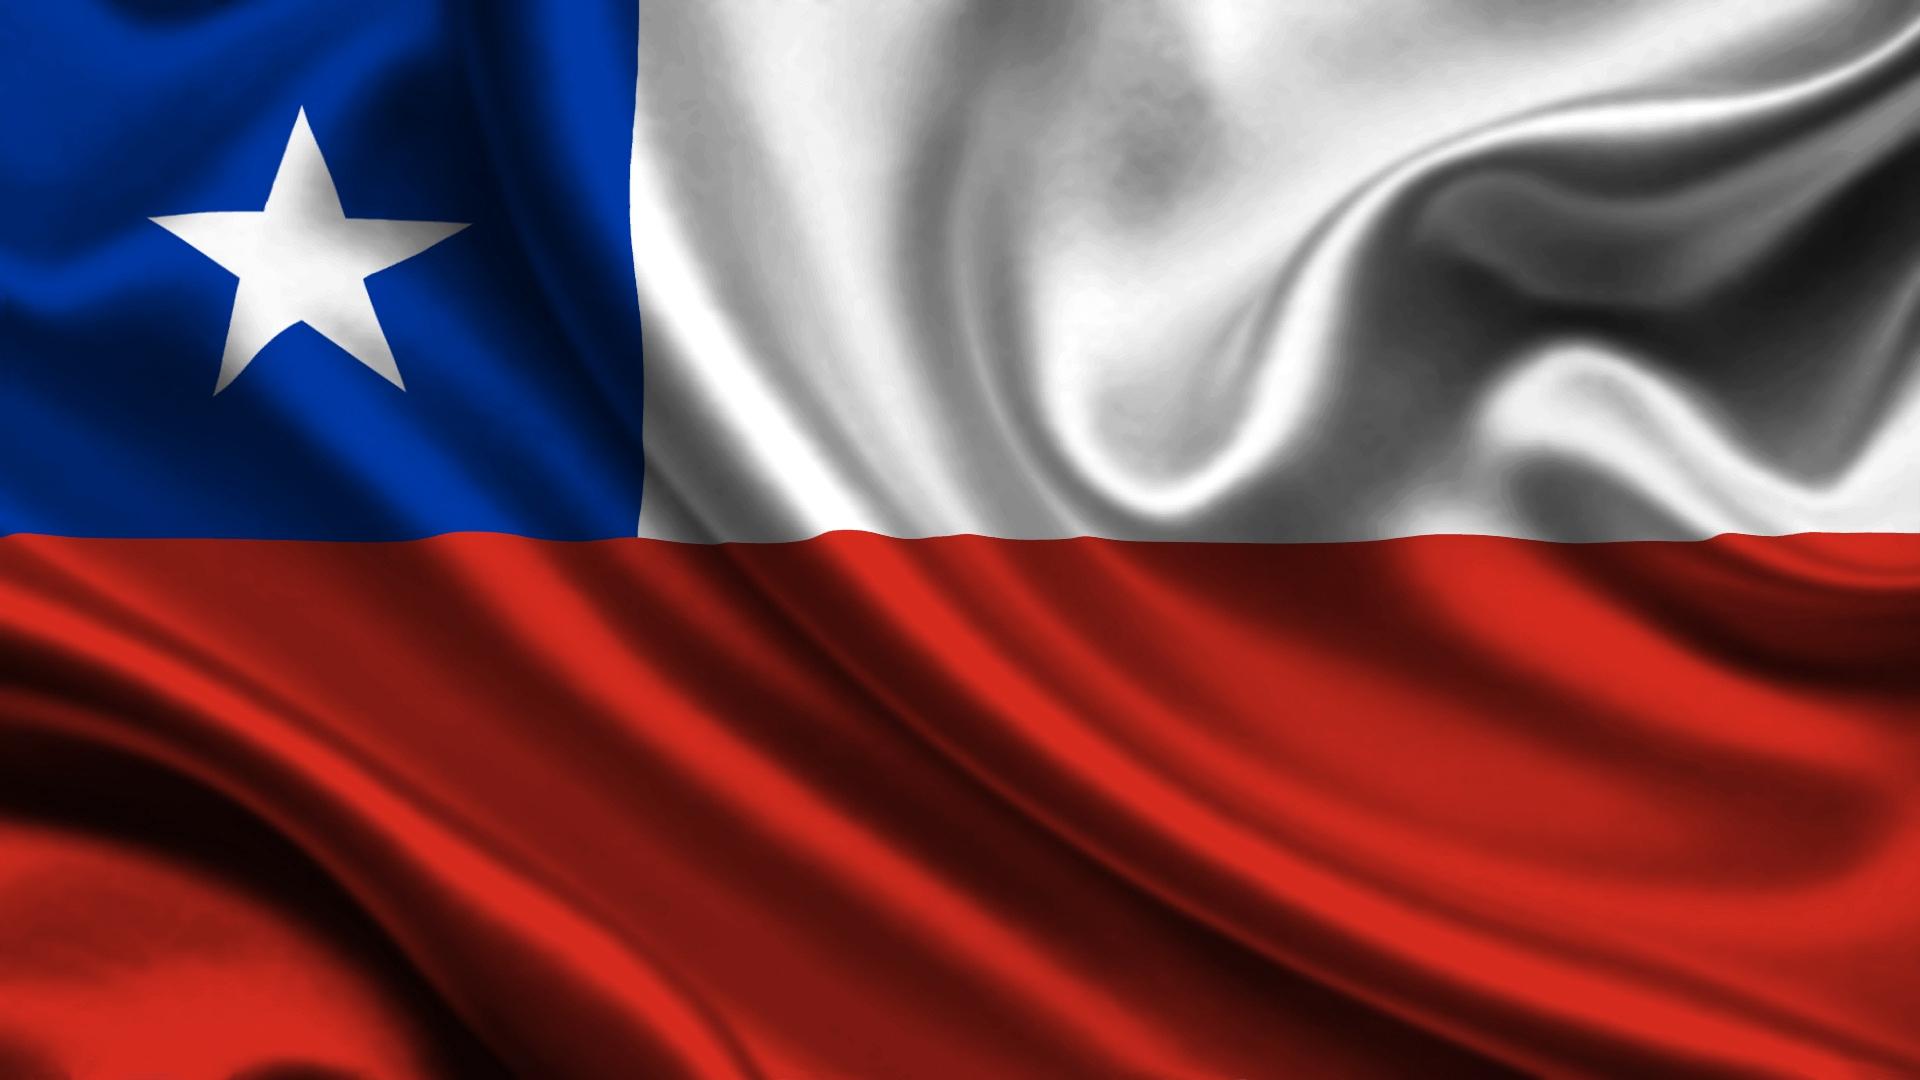 Download wallpaper 1920x1080 chile, satin, flag HD background